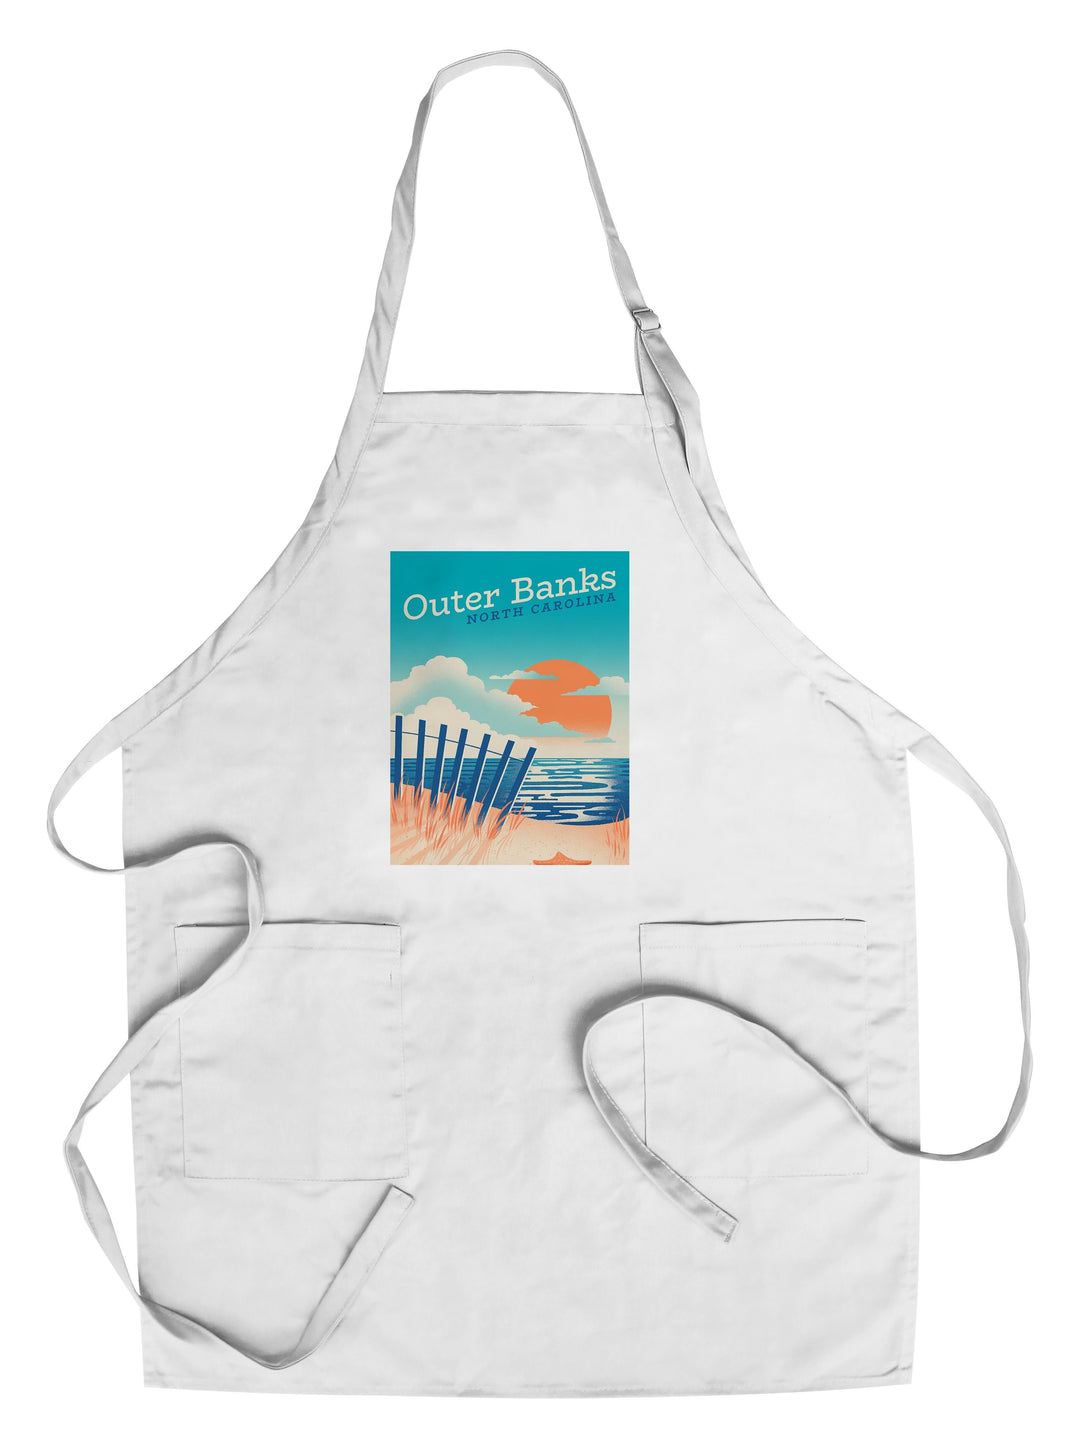 Outer Banks, North Carolina, Sun-faded Shoreline Collection, Glowing Shore, Beach Scene, Towels and Aprons Kitchen Lantern Press Chef's Apron 